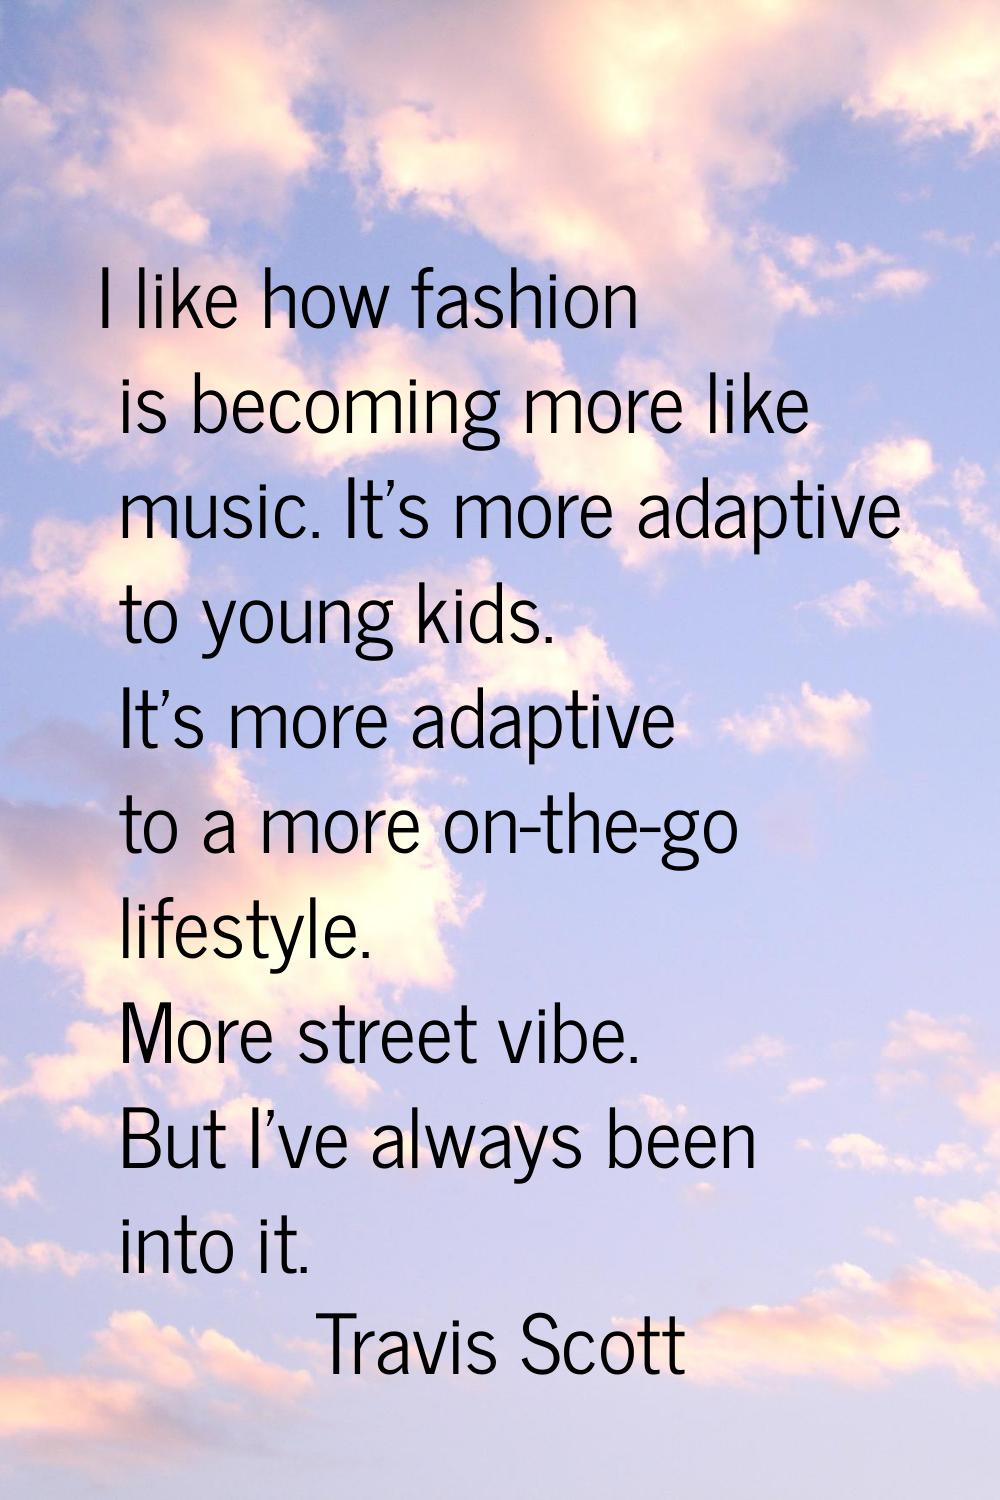 I like how fashion is becoming more like music. It's more adaptive to young kids. It's more adaptiv